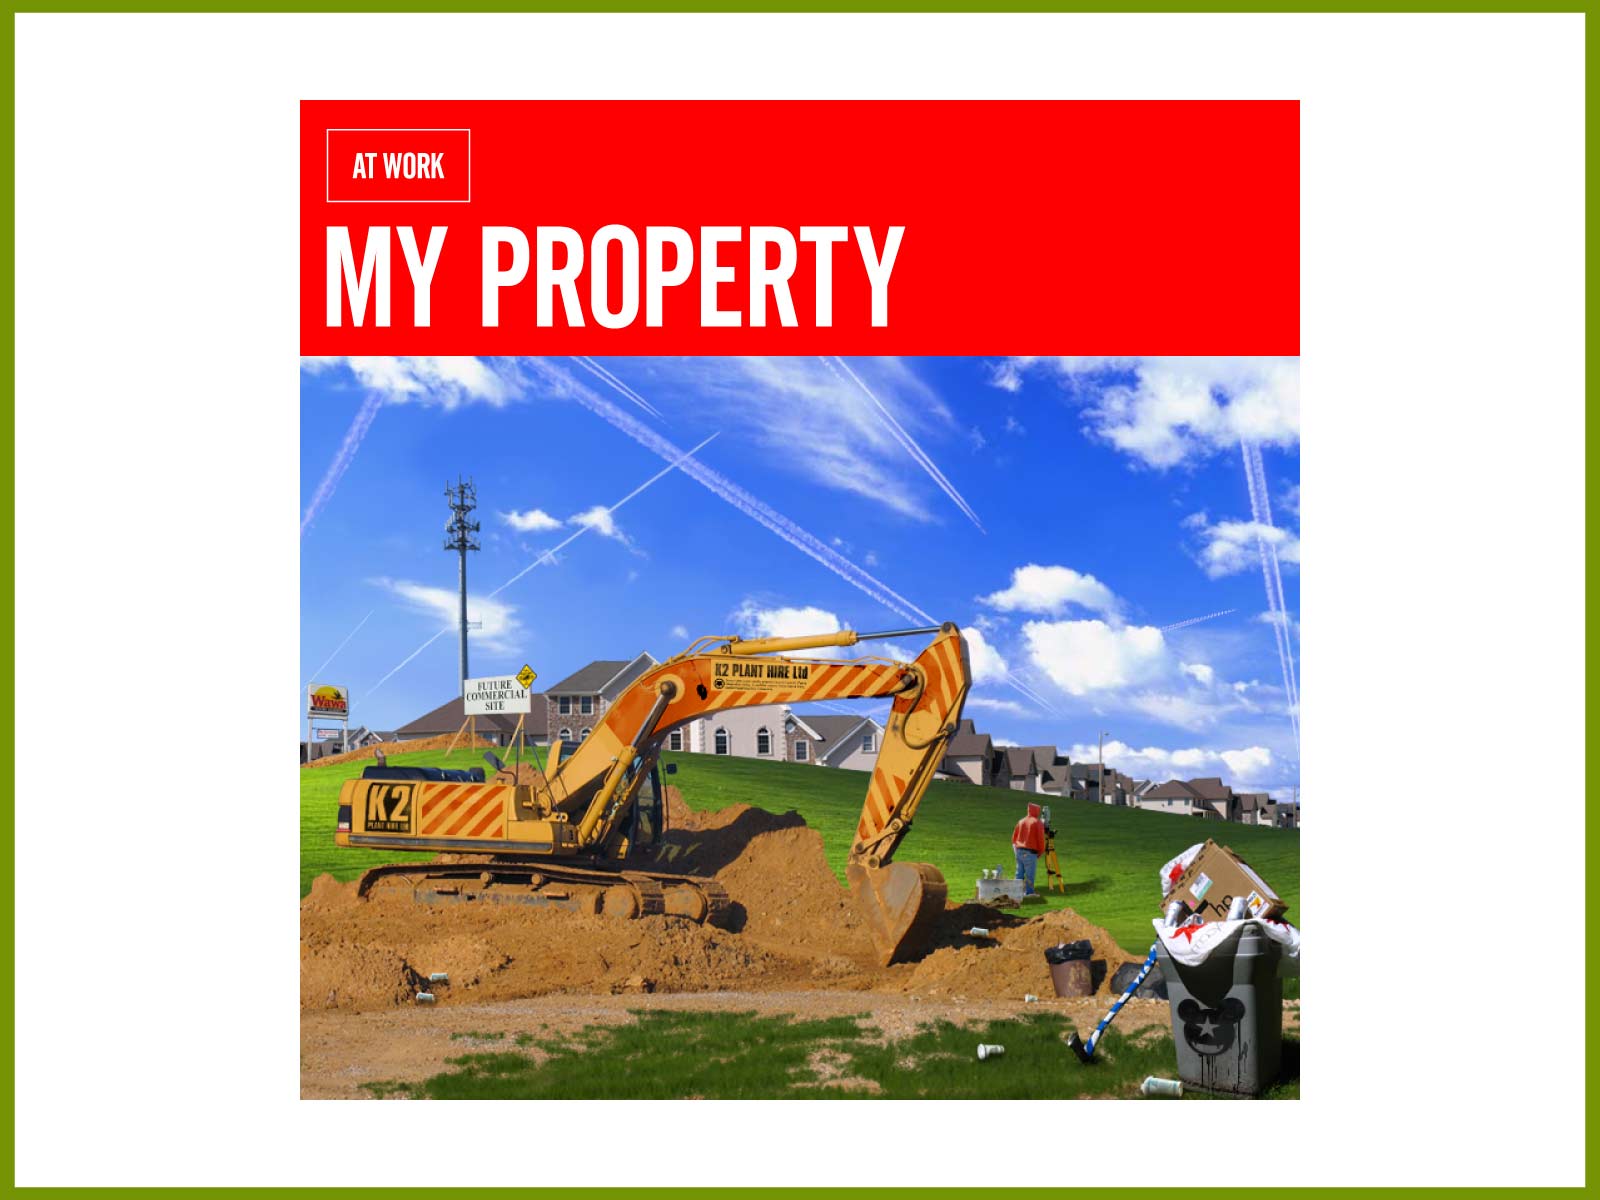 Download the new EP: At Work gives away “My Property”